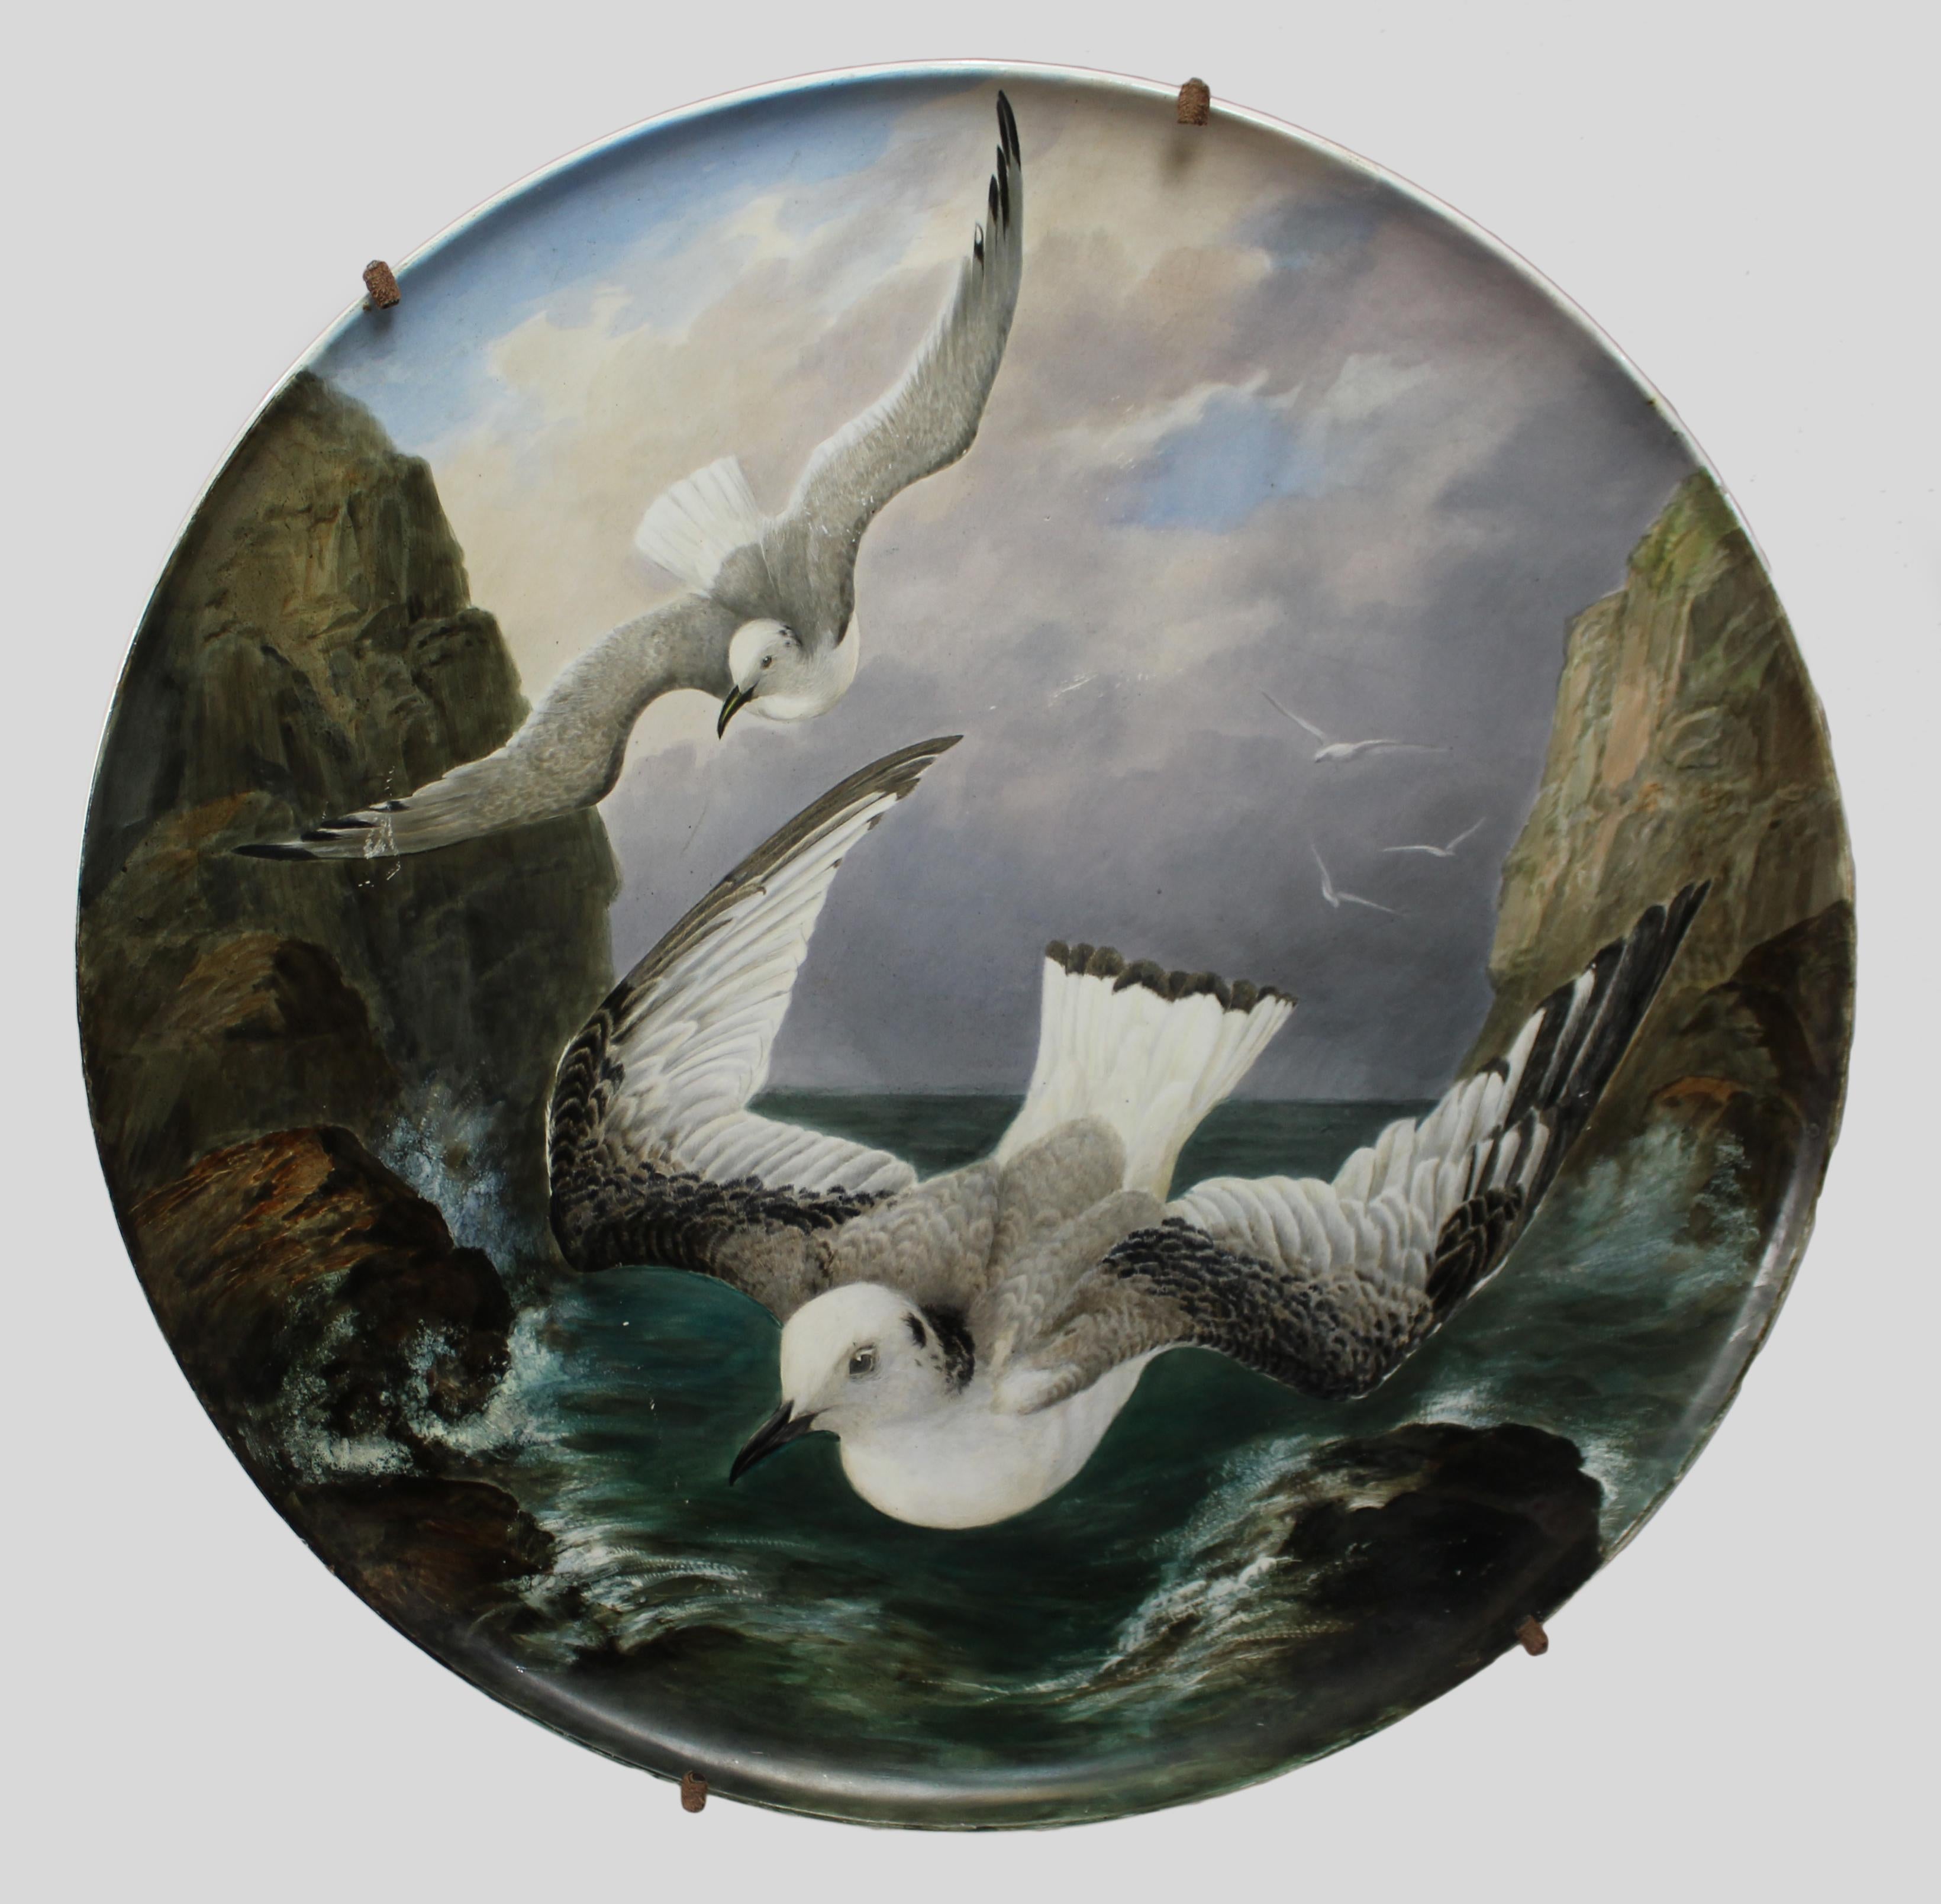 Creil et Montereau painted seagull charger c.1880
 

Manufacturer Creil et Montereau

Period Late 19th c.

Diameter 56.5 cm / 22 1/4 in

Provenance Exhibited in 1880 Howell & James art pottery exhibition, removed from a stately home in